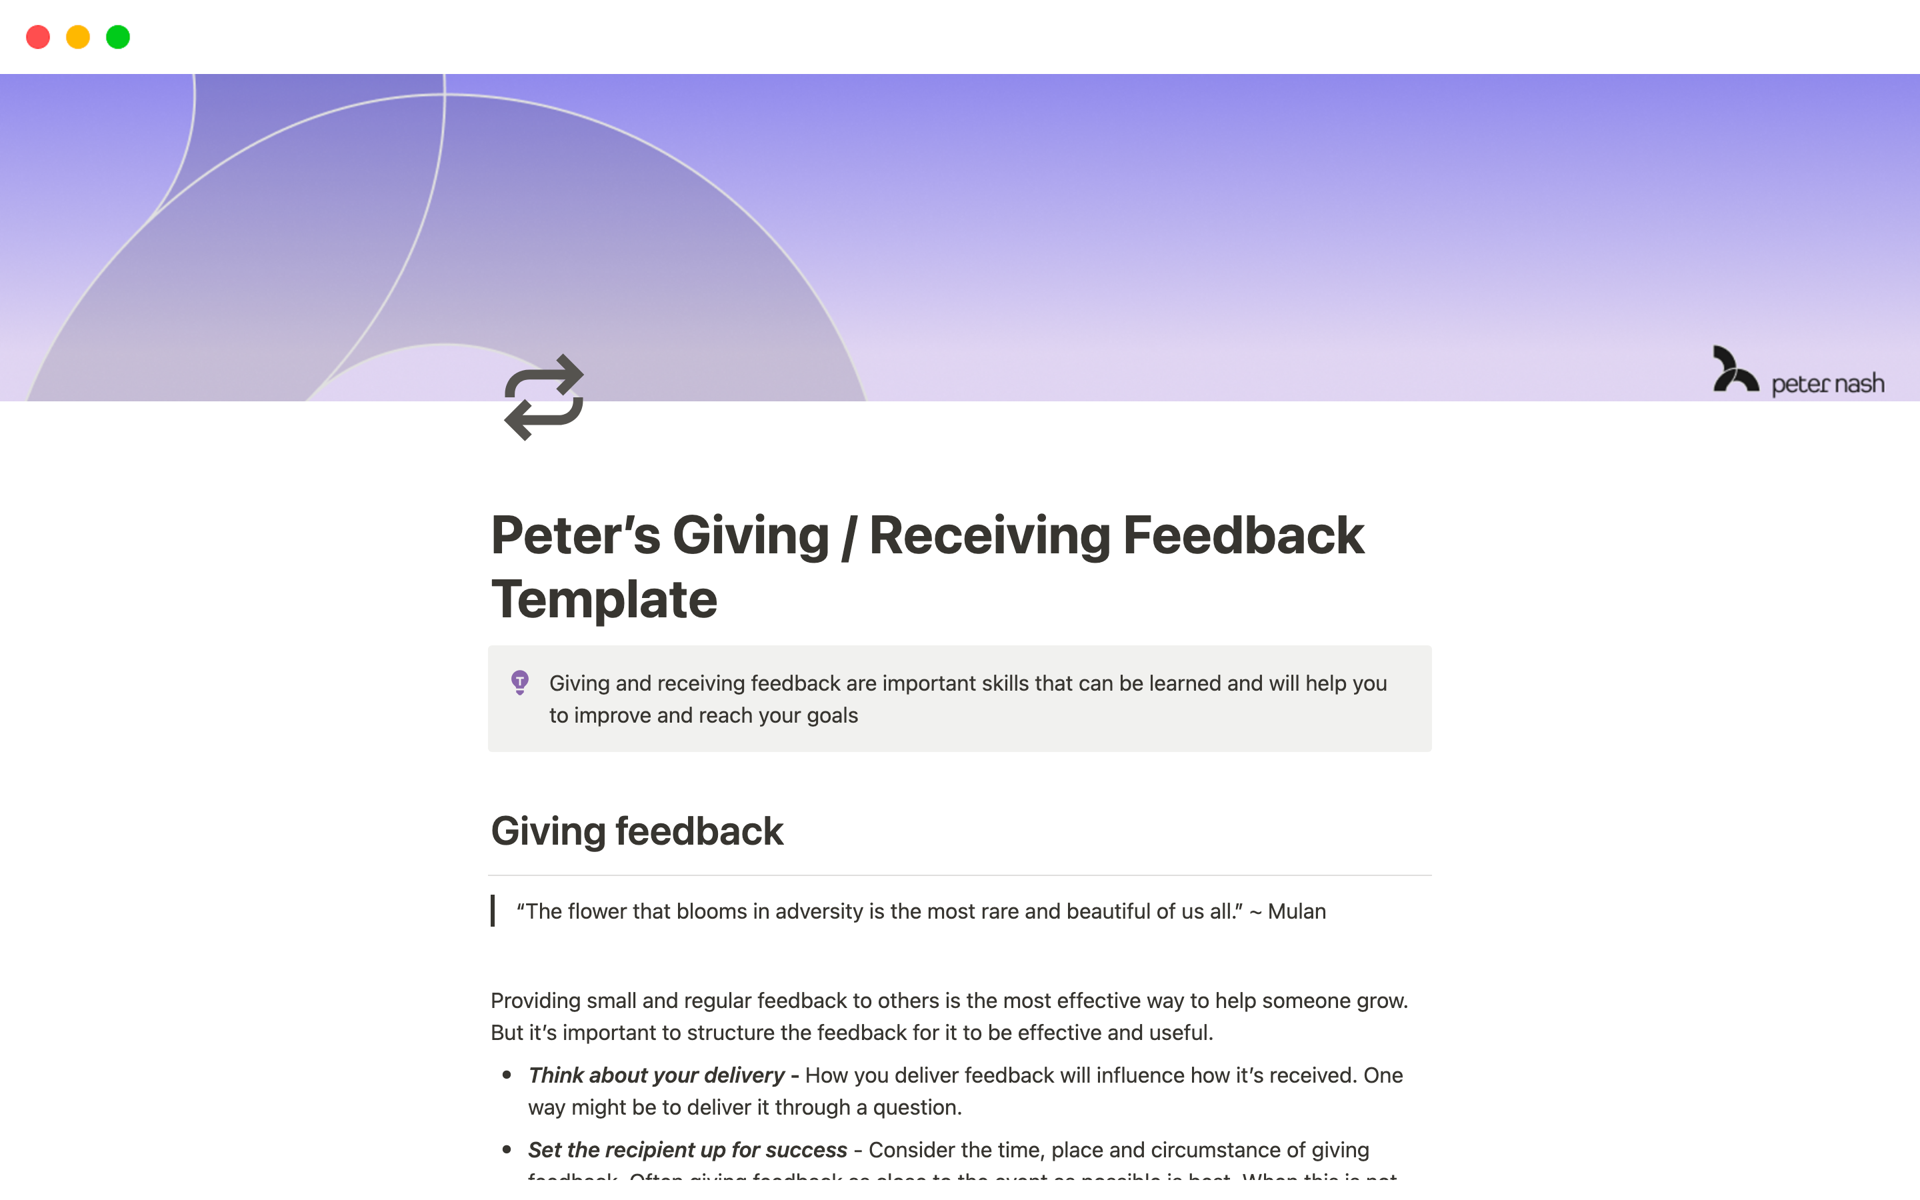 A Notion template to guide the giving and receiving of feedback for professional and team growth.